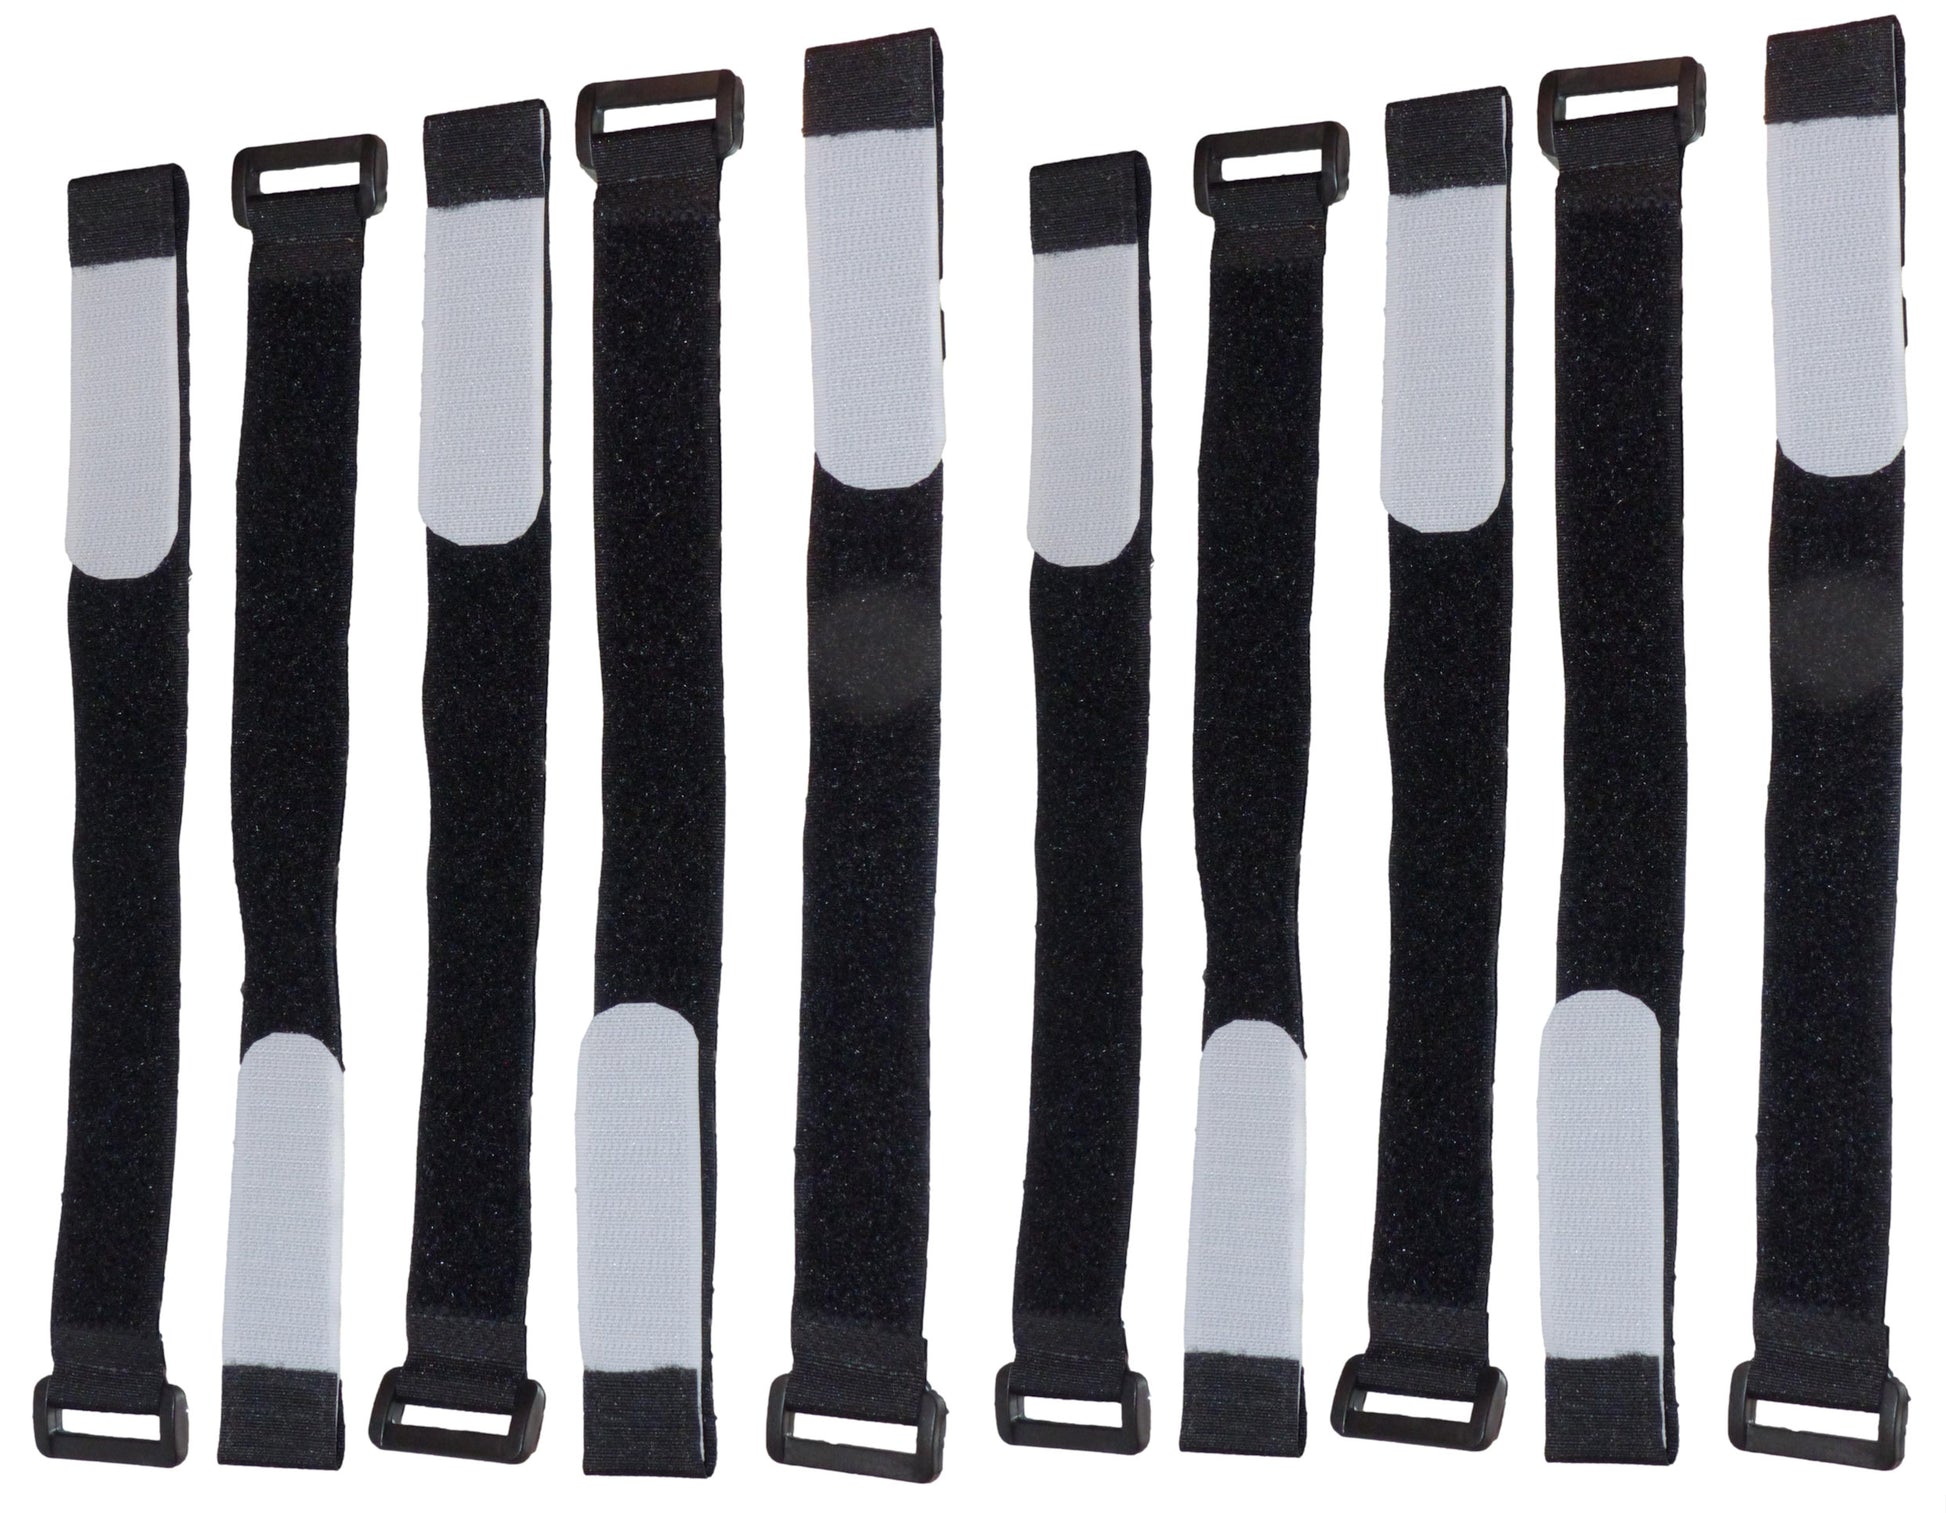 25mm Hook and Loop Cinch Straps in Black, White End (Pack of 10)